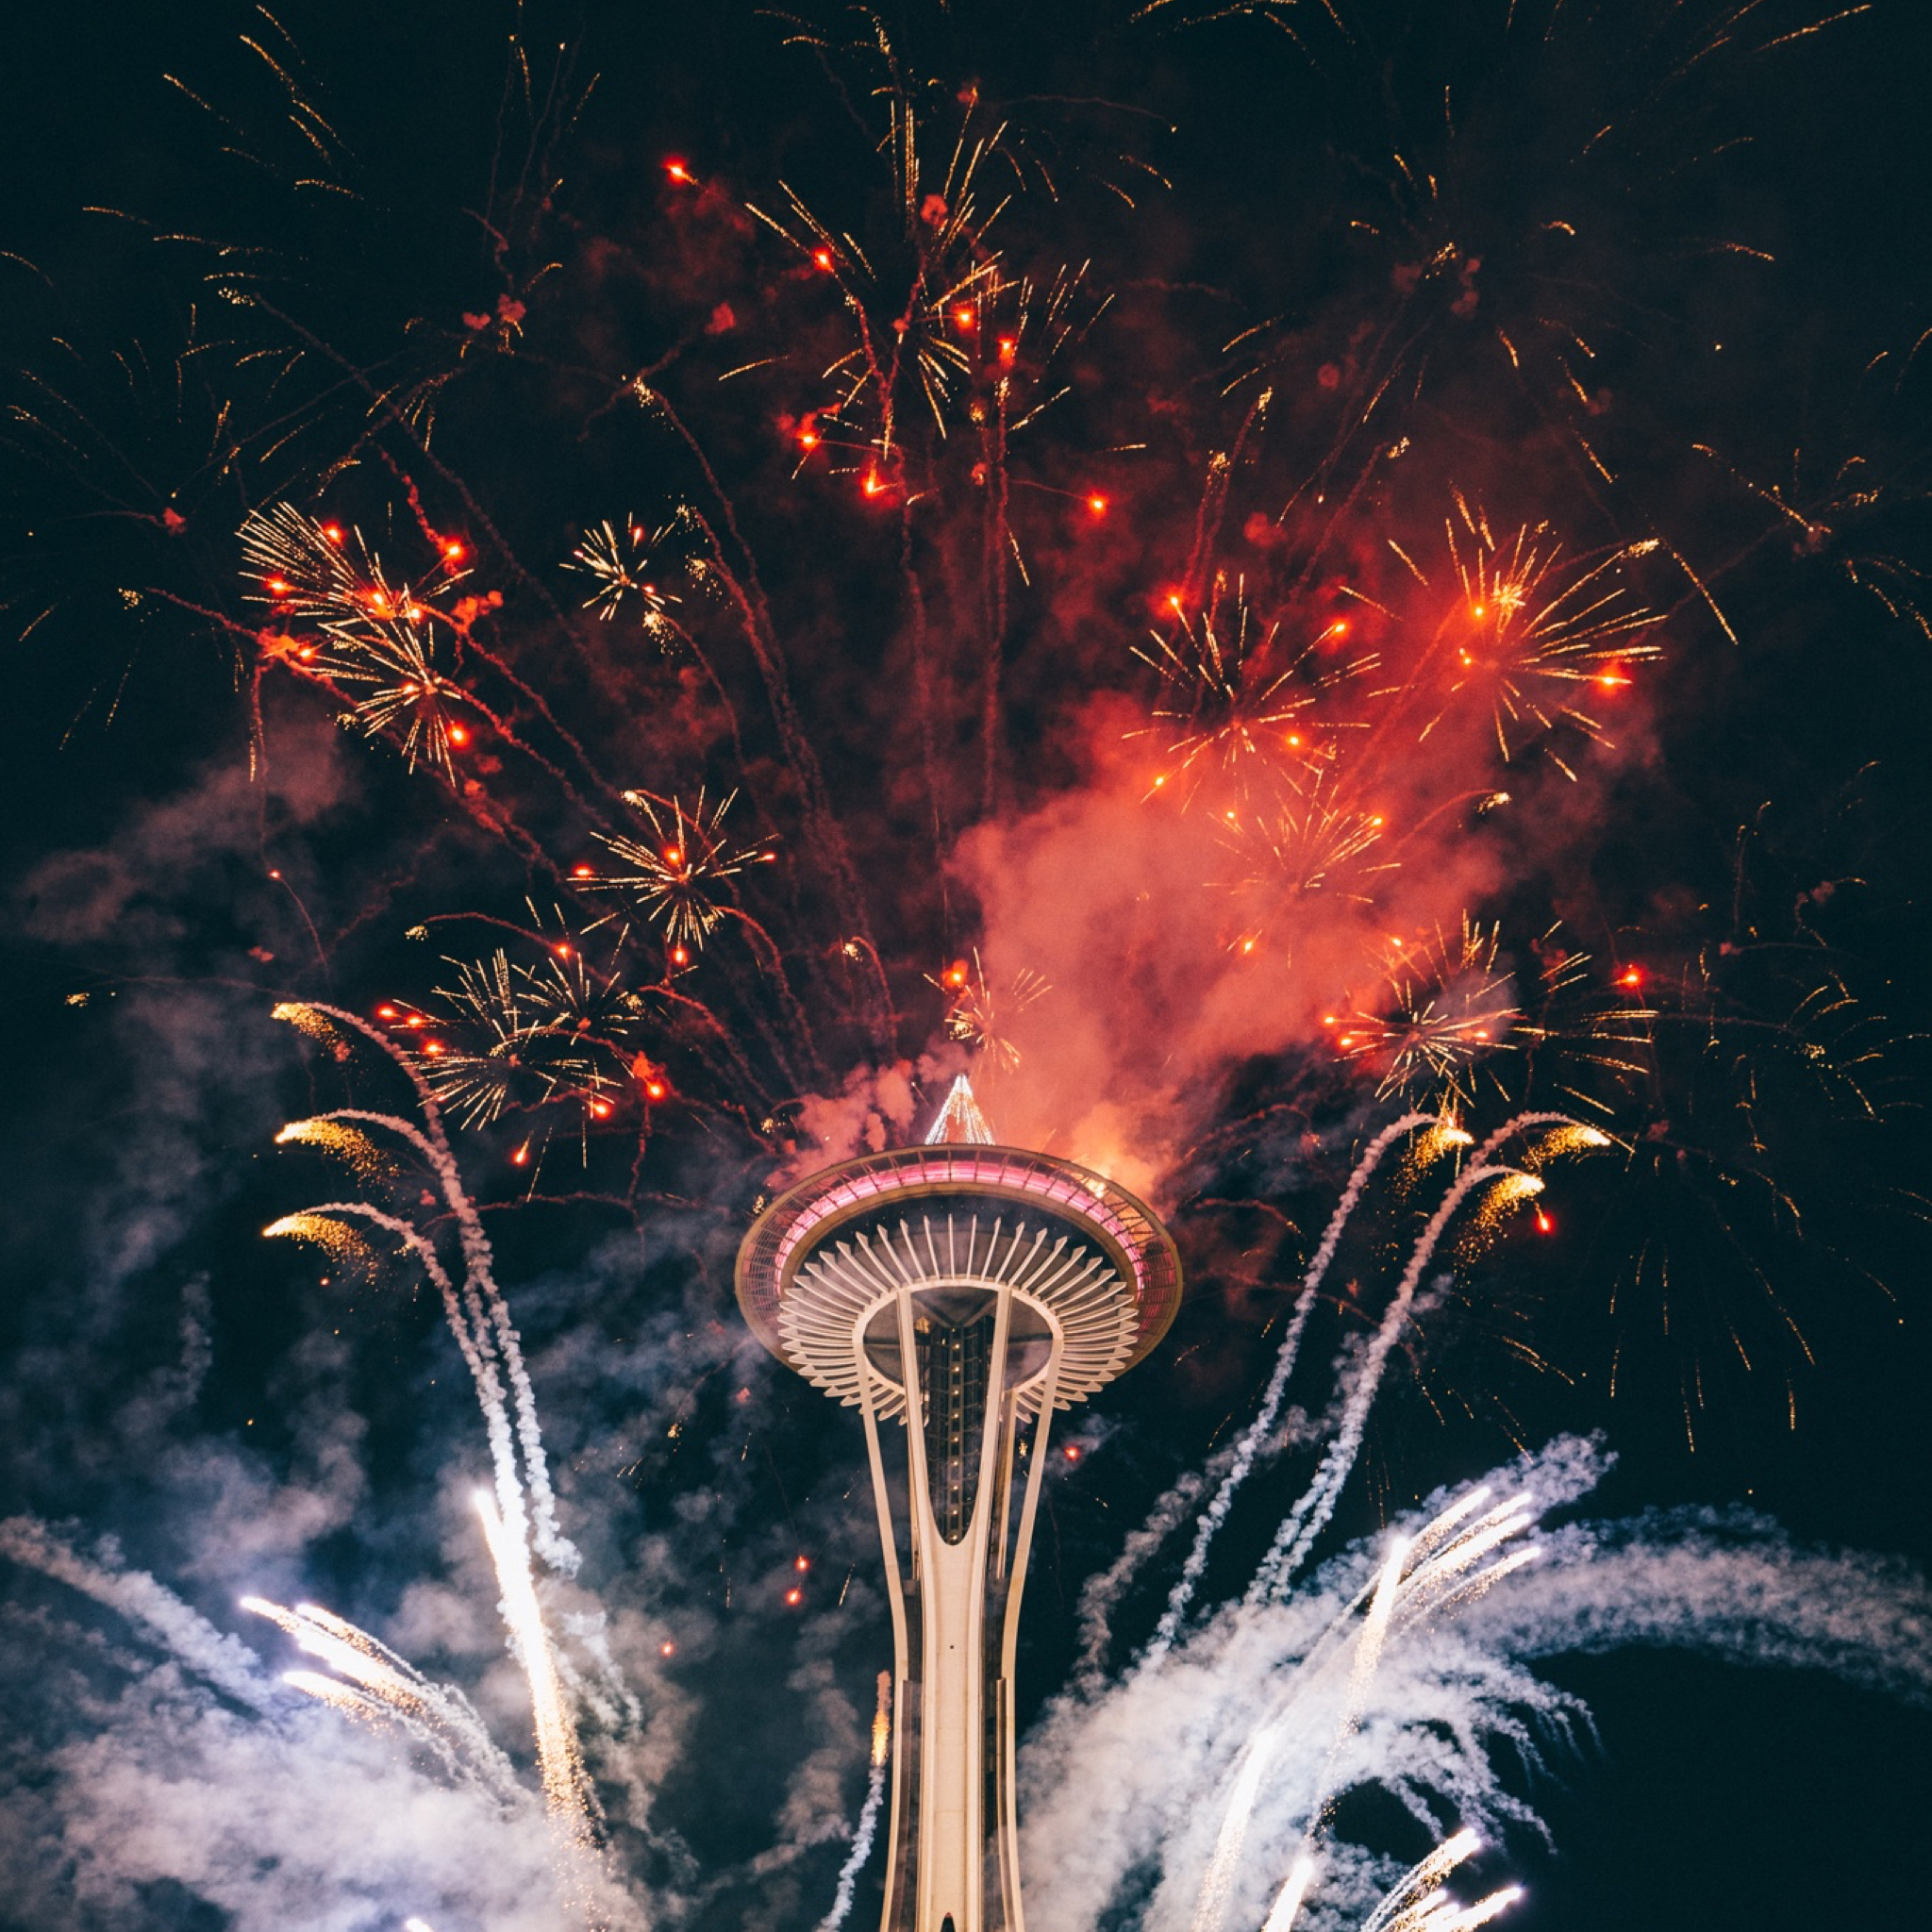 Fireworks Iphone Wallpaper - Seattle New Years Eve 2020 - HD Wallpaper 